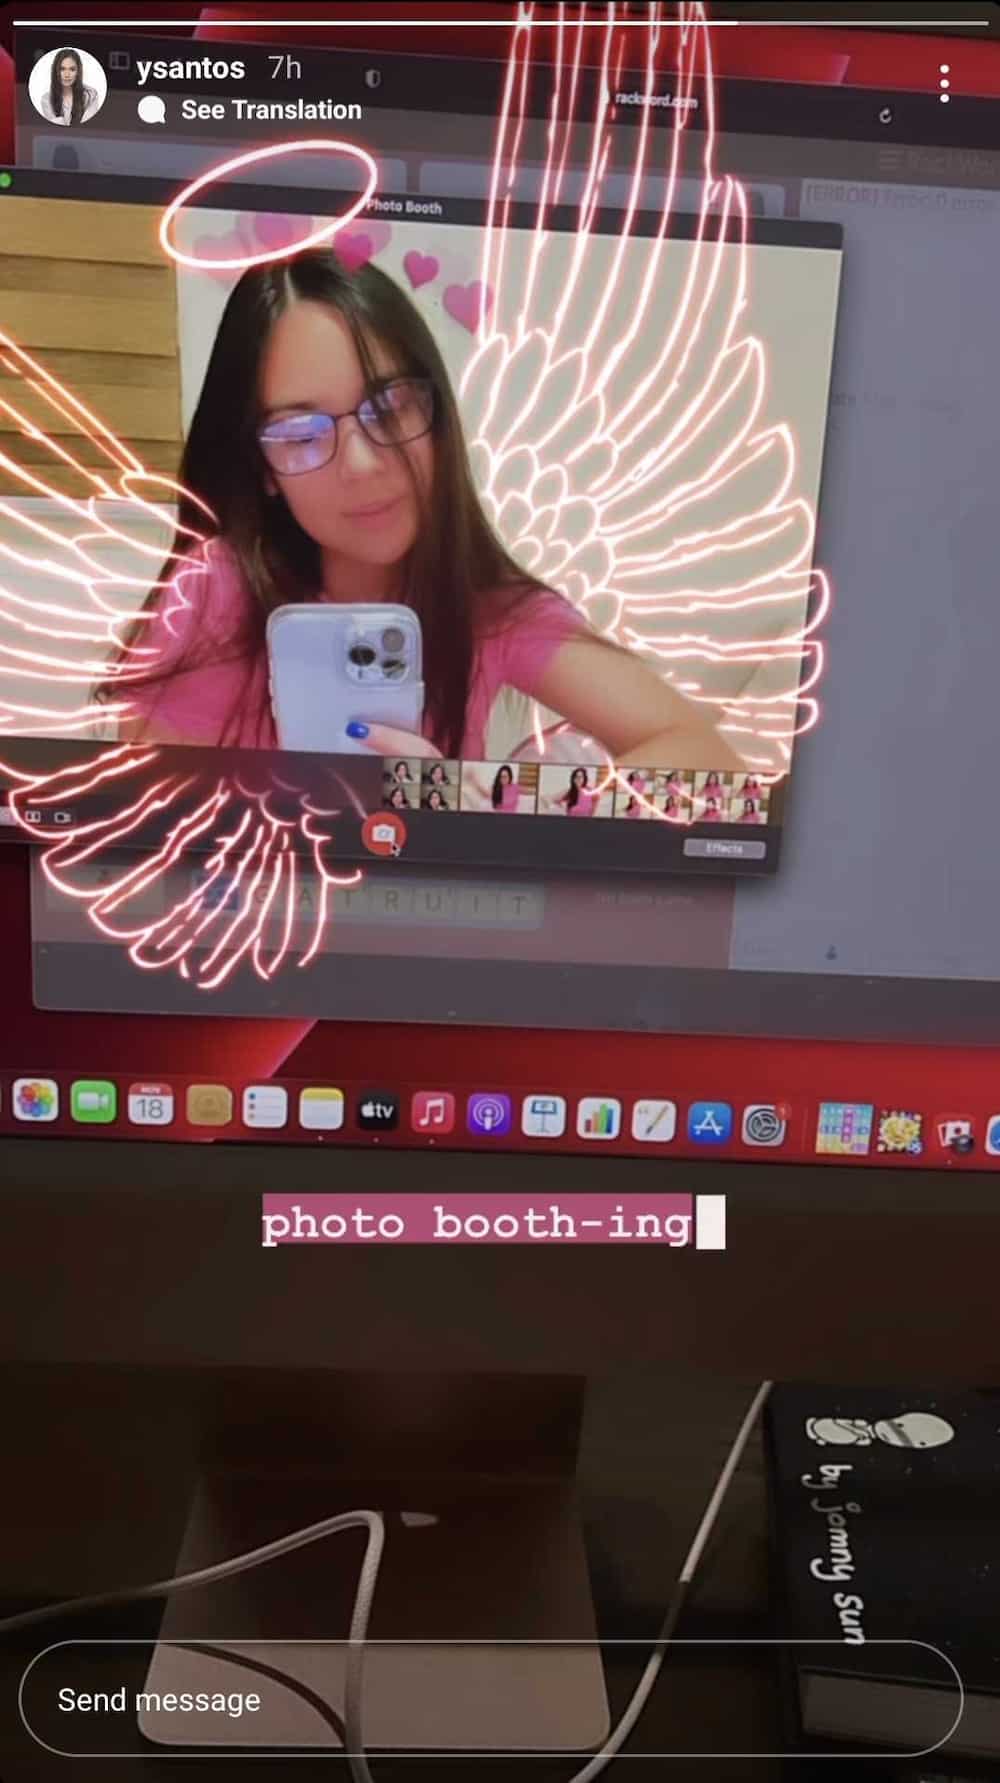 Yen Santos shares "photo booth-ing" selfie with angel filter on Instagram